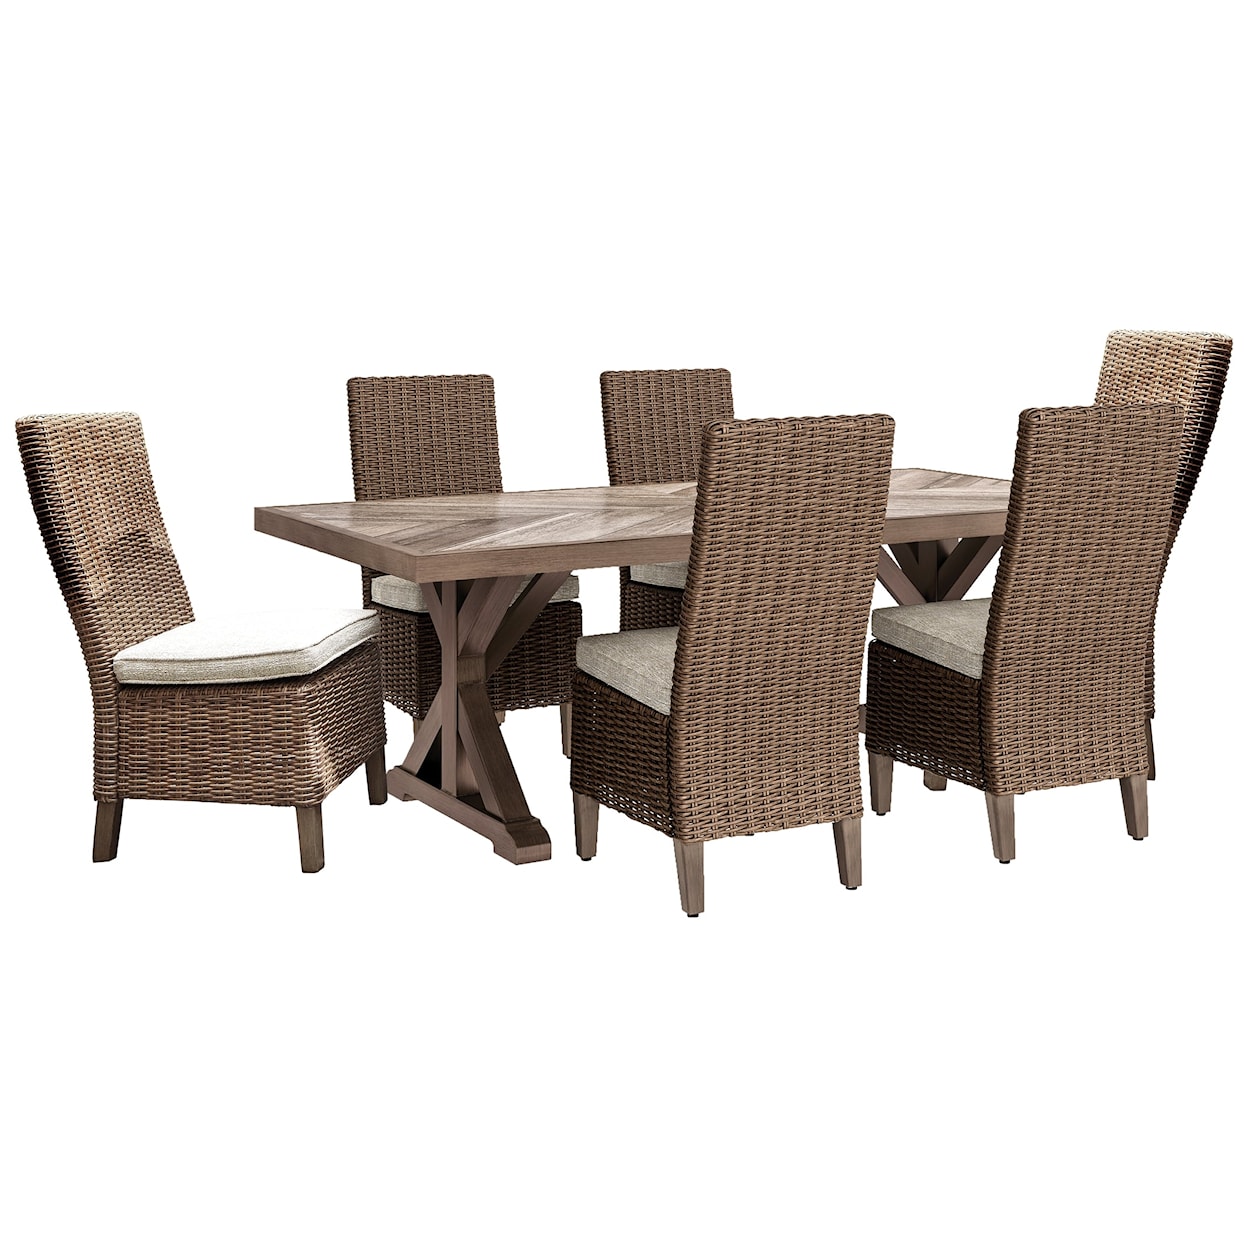 Ashley Furniture Signature Design Beachcroft Outdoor Dining Table with 6 Chairs